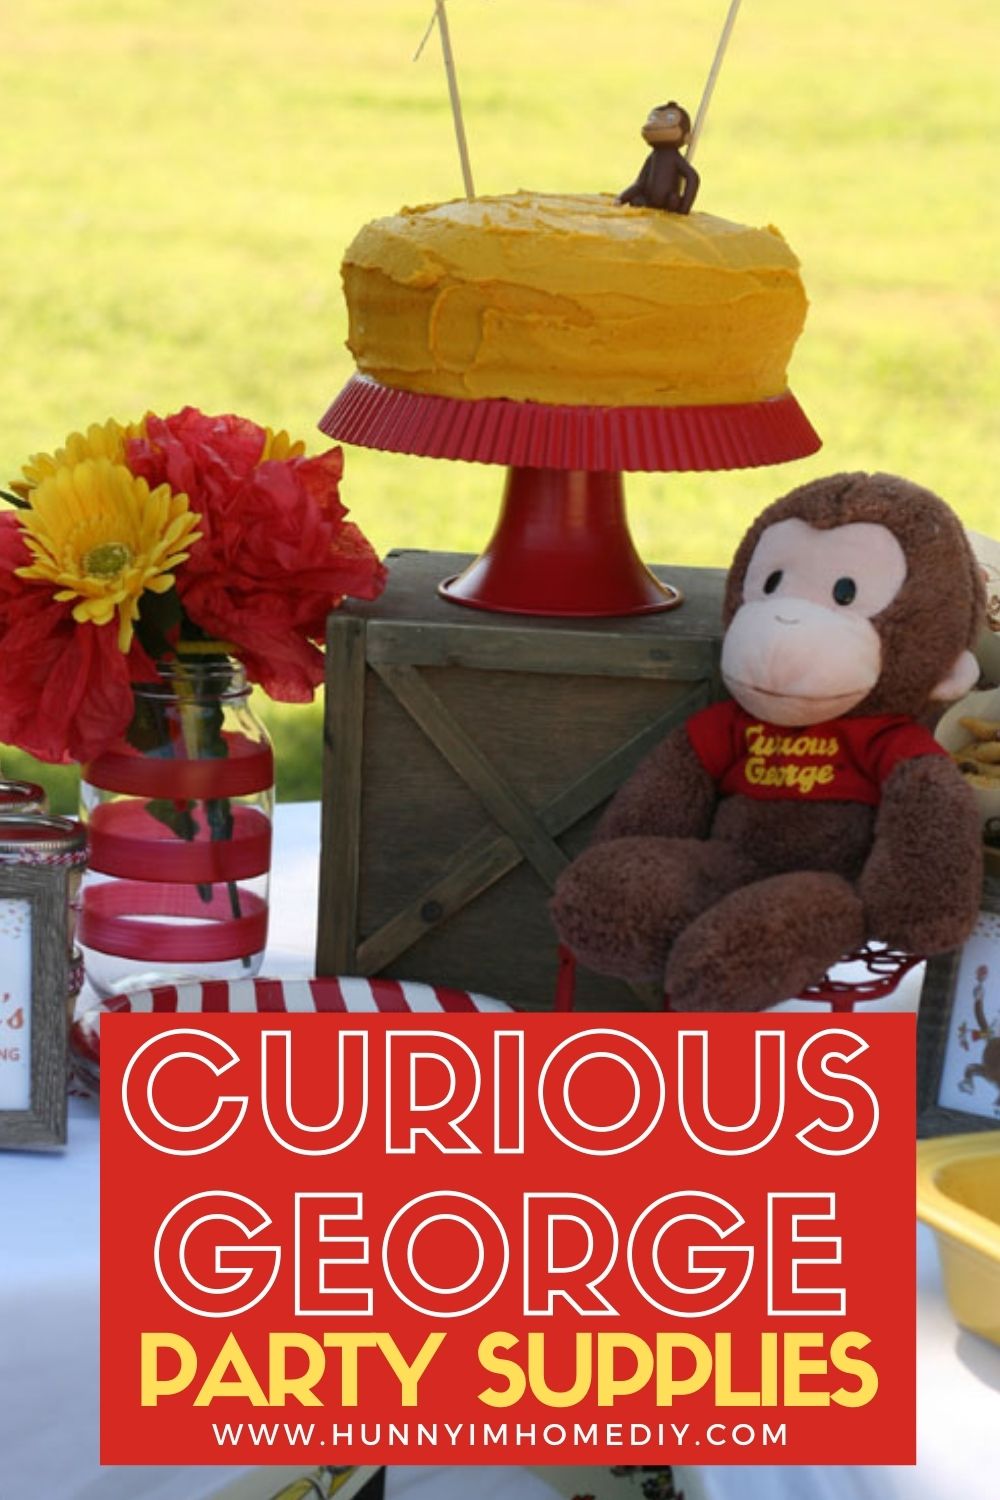 Happy Birthday Banner and Hanging Swirl Decorations Curious George Party Supplies Pack Including Tablecover 